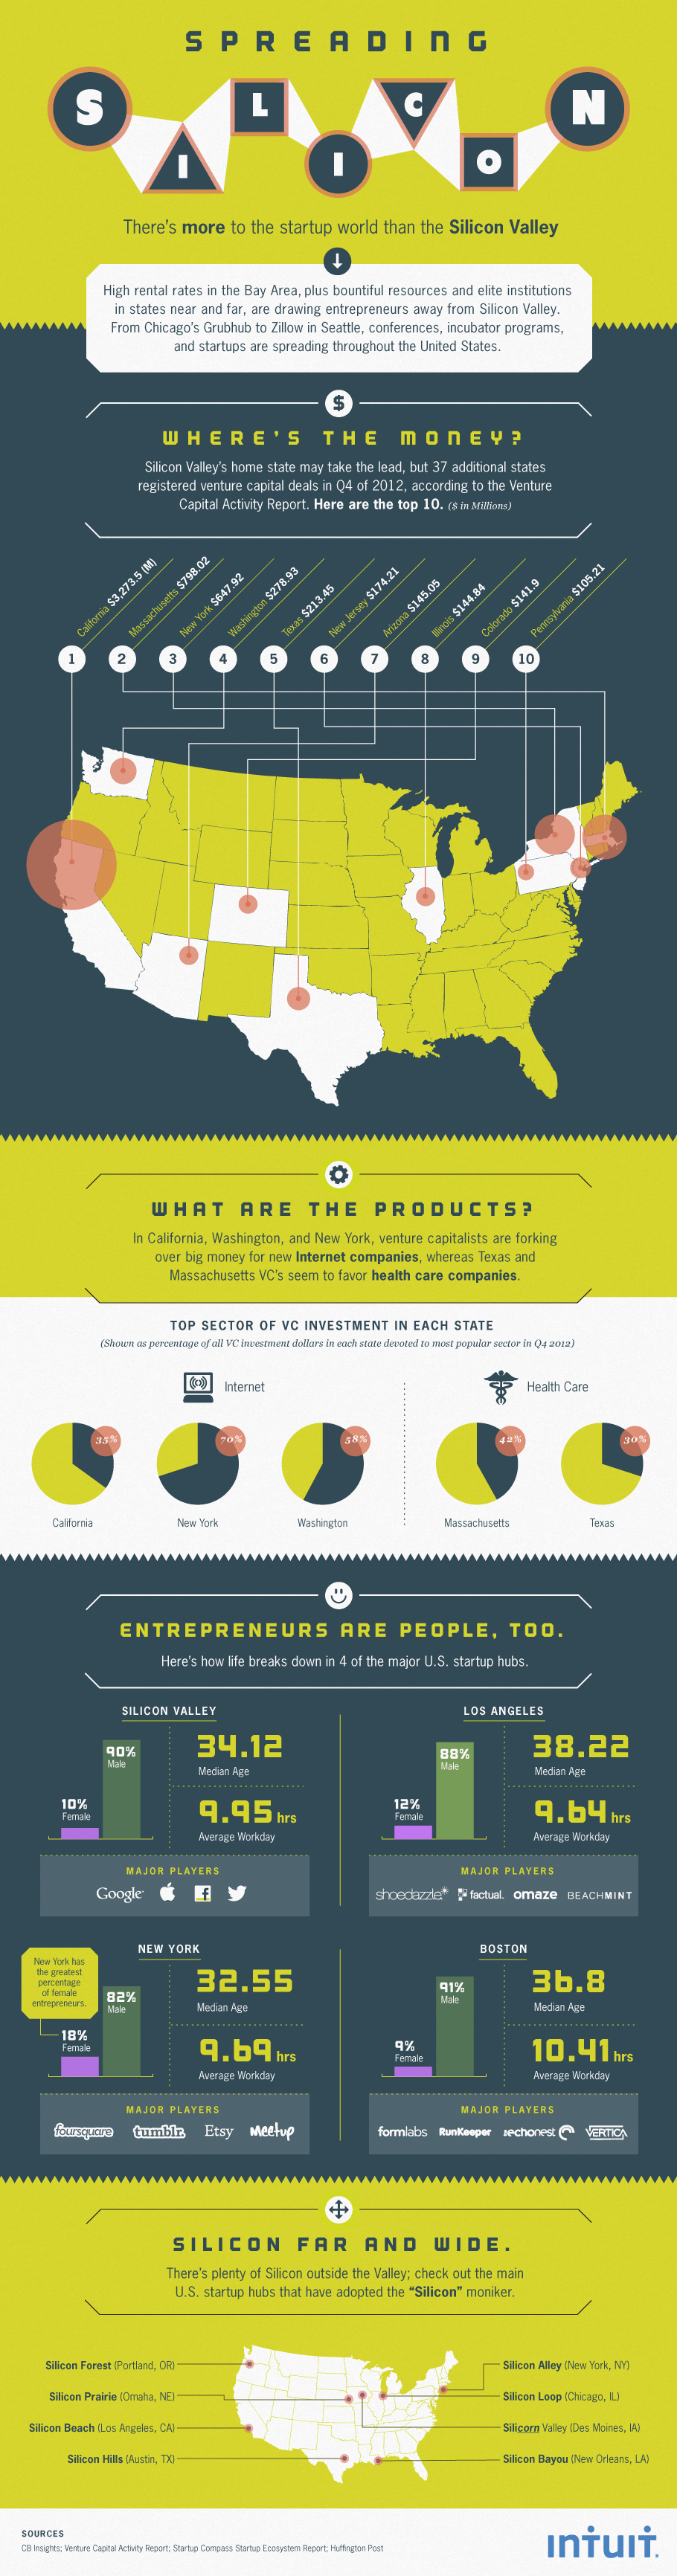 10 Best U.S. States for Launching Your Software Startup (Infographic)